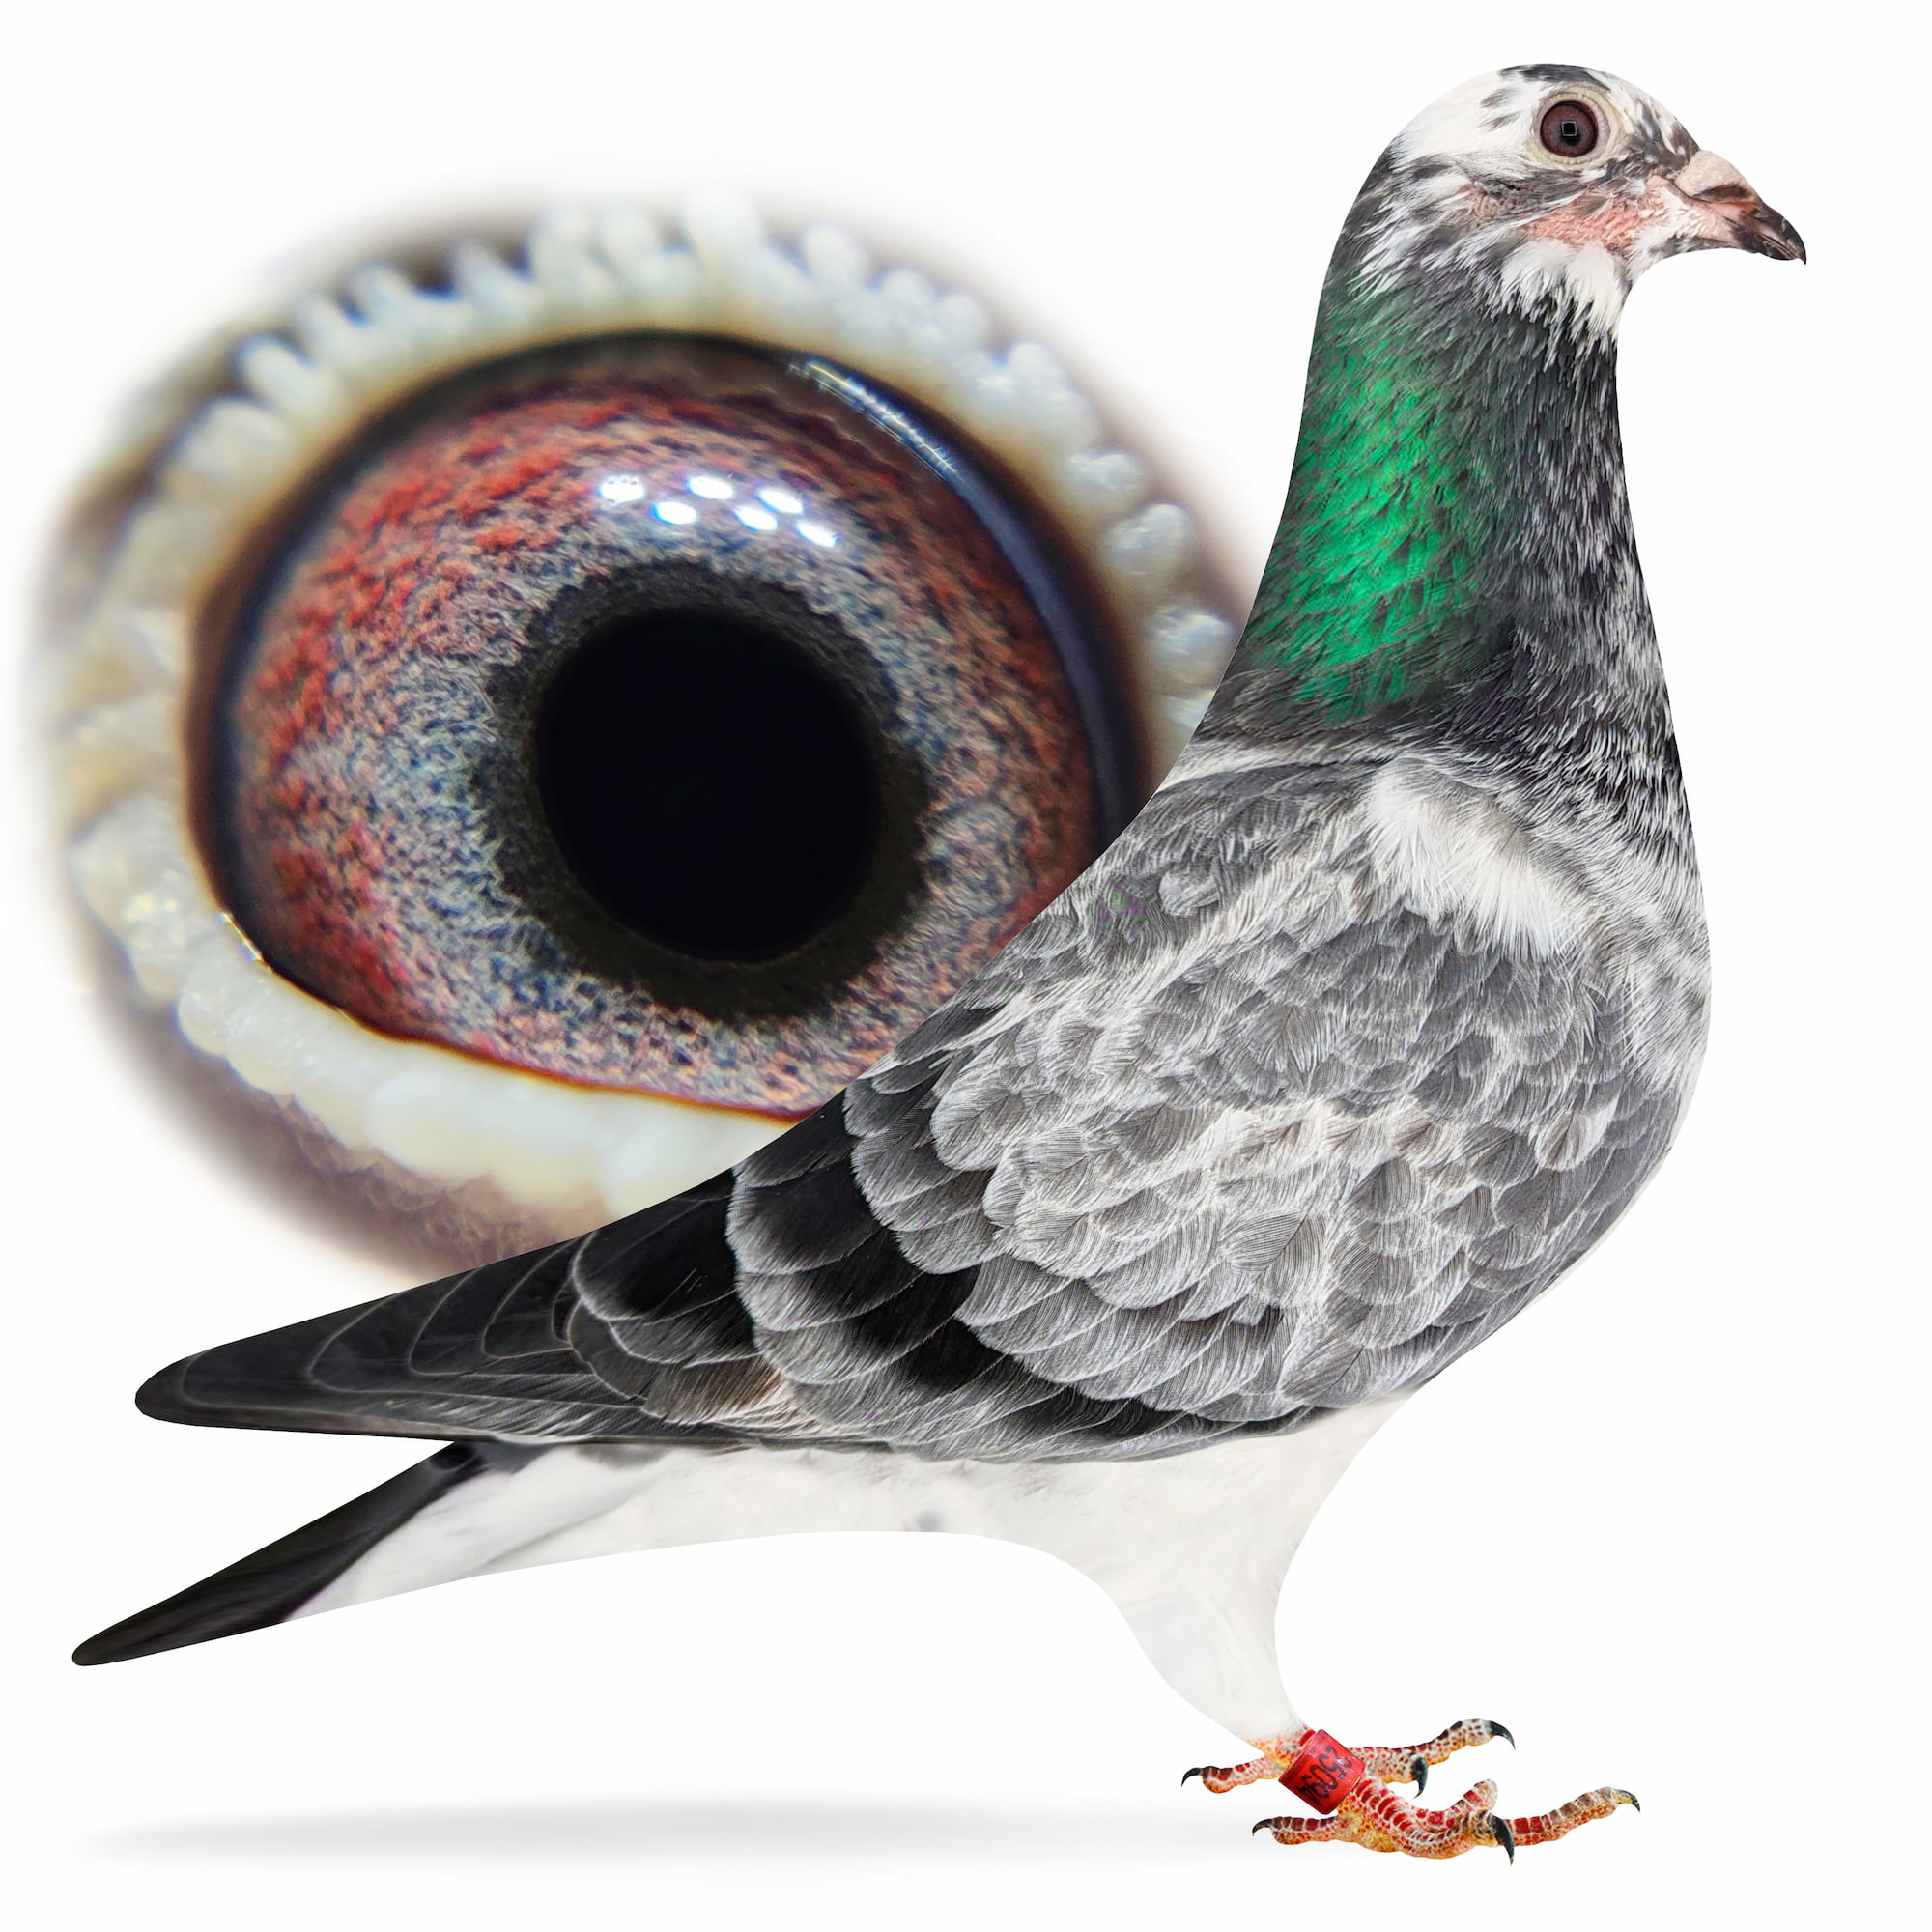 Diverse bord Antipoison Welcome to Walkers Racing Pigeons | Walkers Racing Pigeons